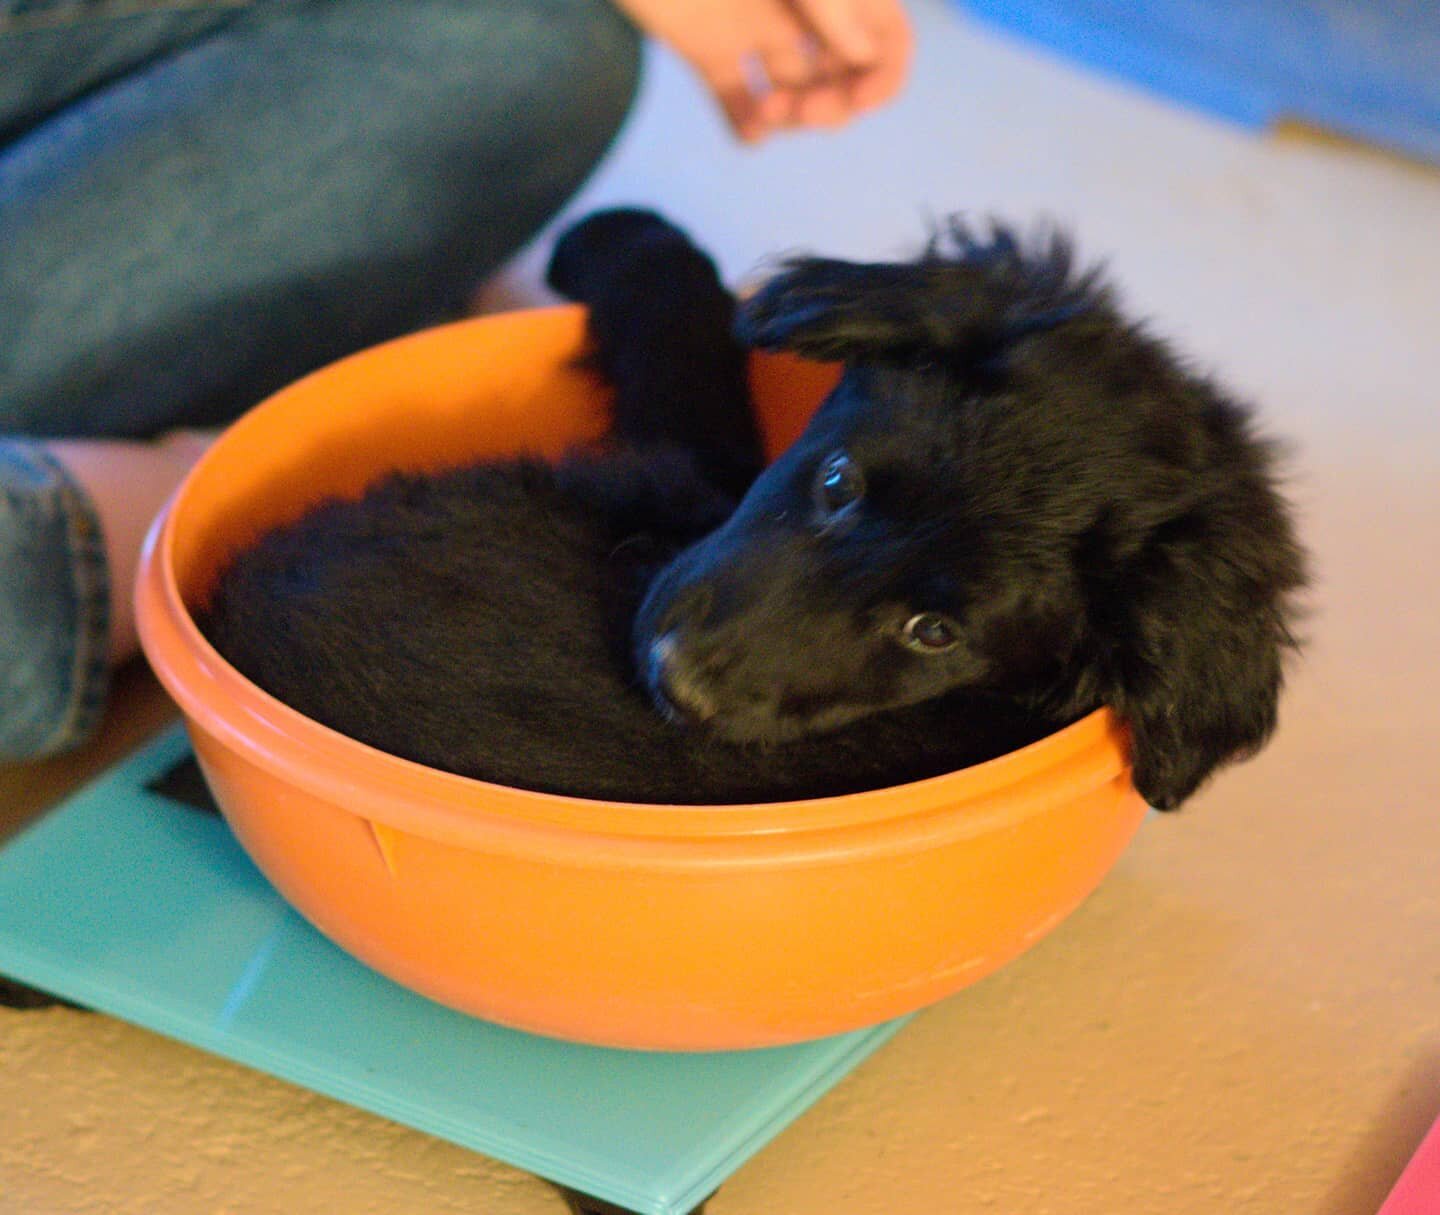 Back when Pepper fit in the mixing bowl. She no longer fits in the mixing bowl.